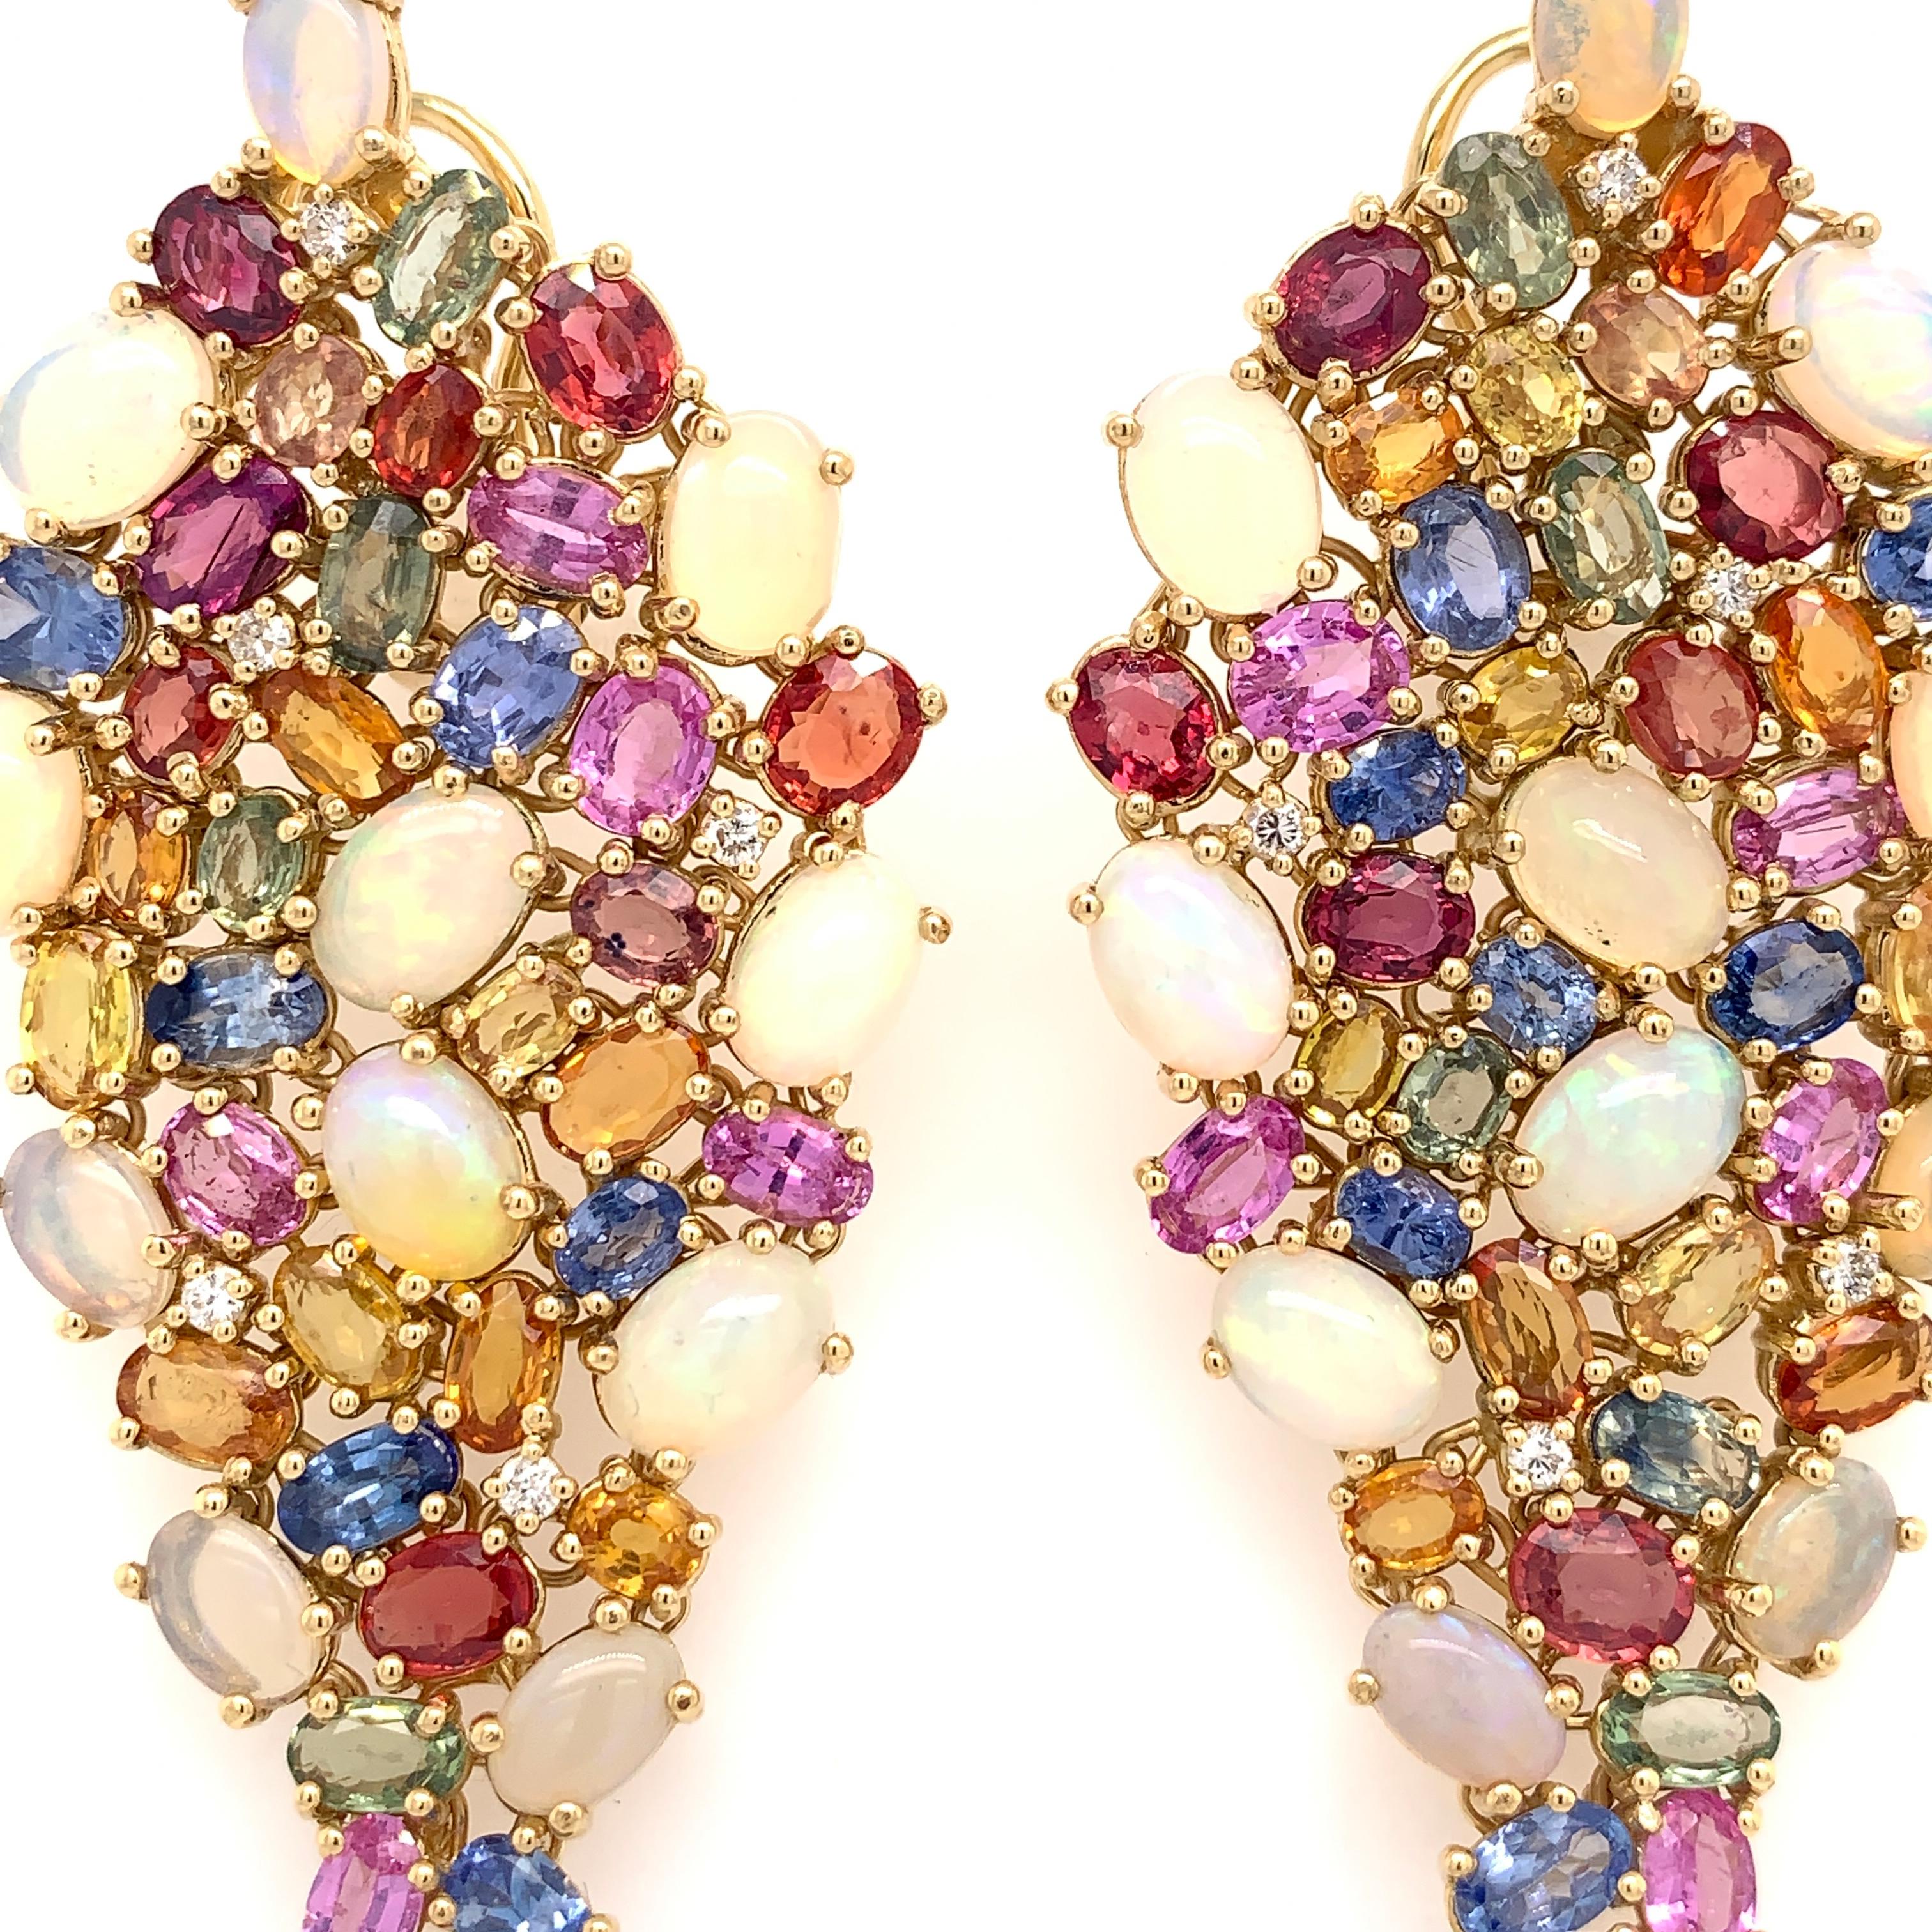 Play of Colors Collection 

Ethiopian Opal, Color Sapphire and Diamond chandelier earrings set in 18K yellow gold. 

Color Sapphire: 19.32ct total weight.
Ethiopian Opal: 9.81ct total weight.
Diamonds: 0.21ct total weight.
All diamonds are G-H/SI